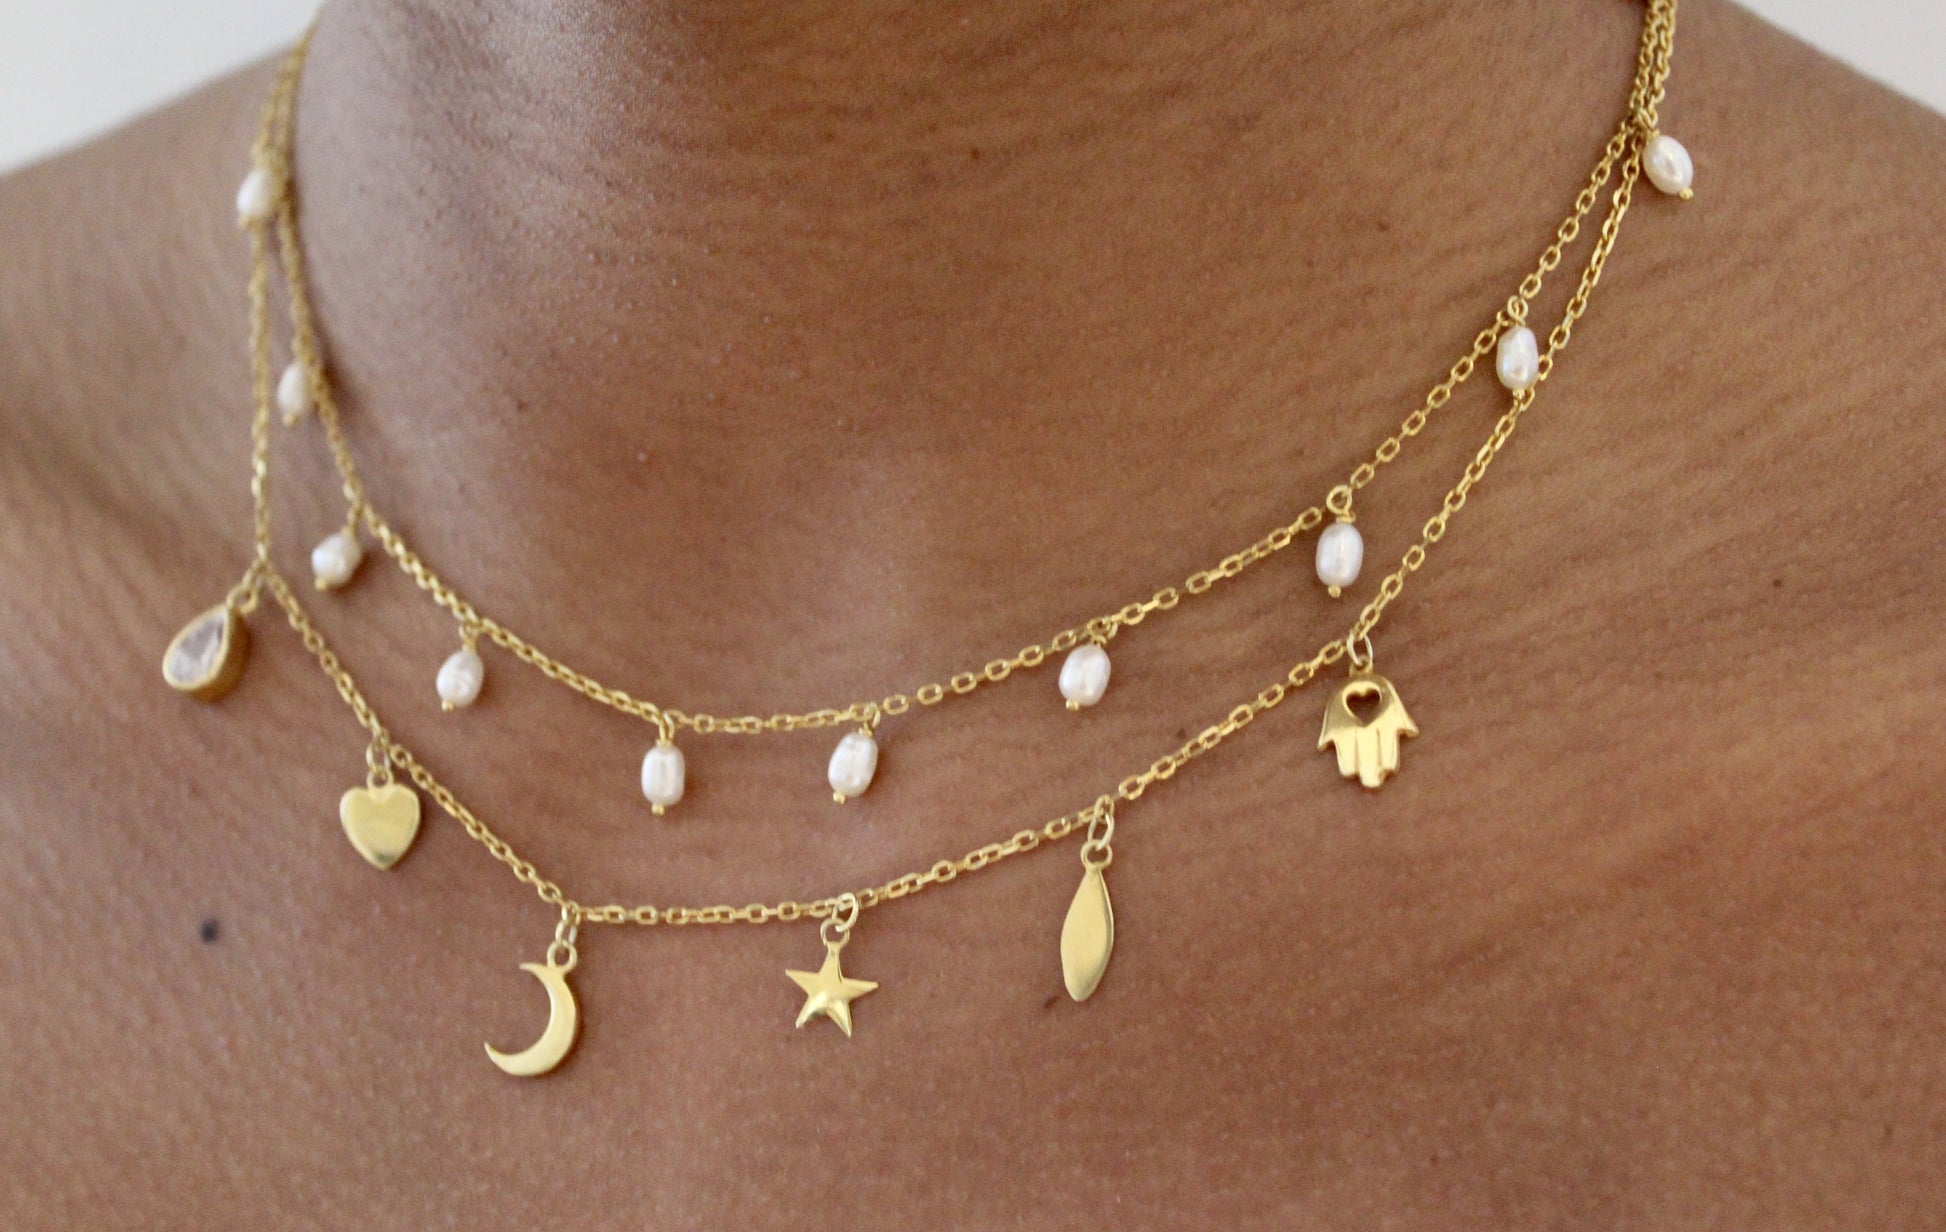 Give Me Pearls Necklace - you by me.